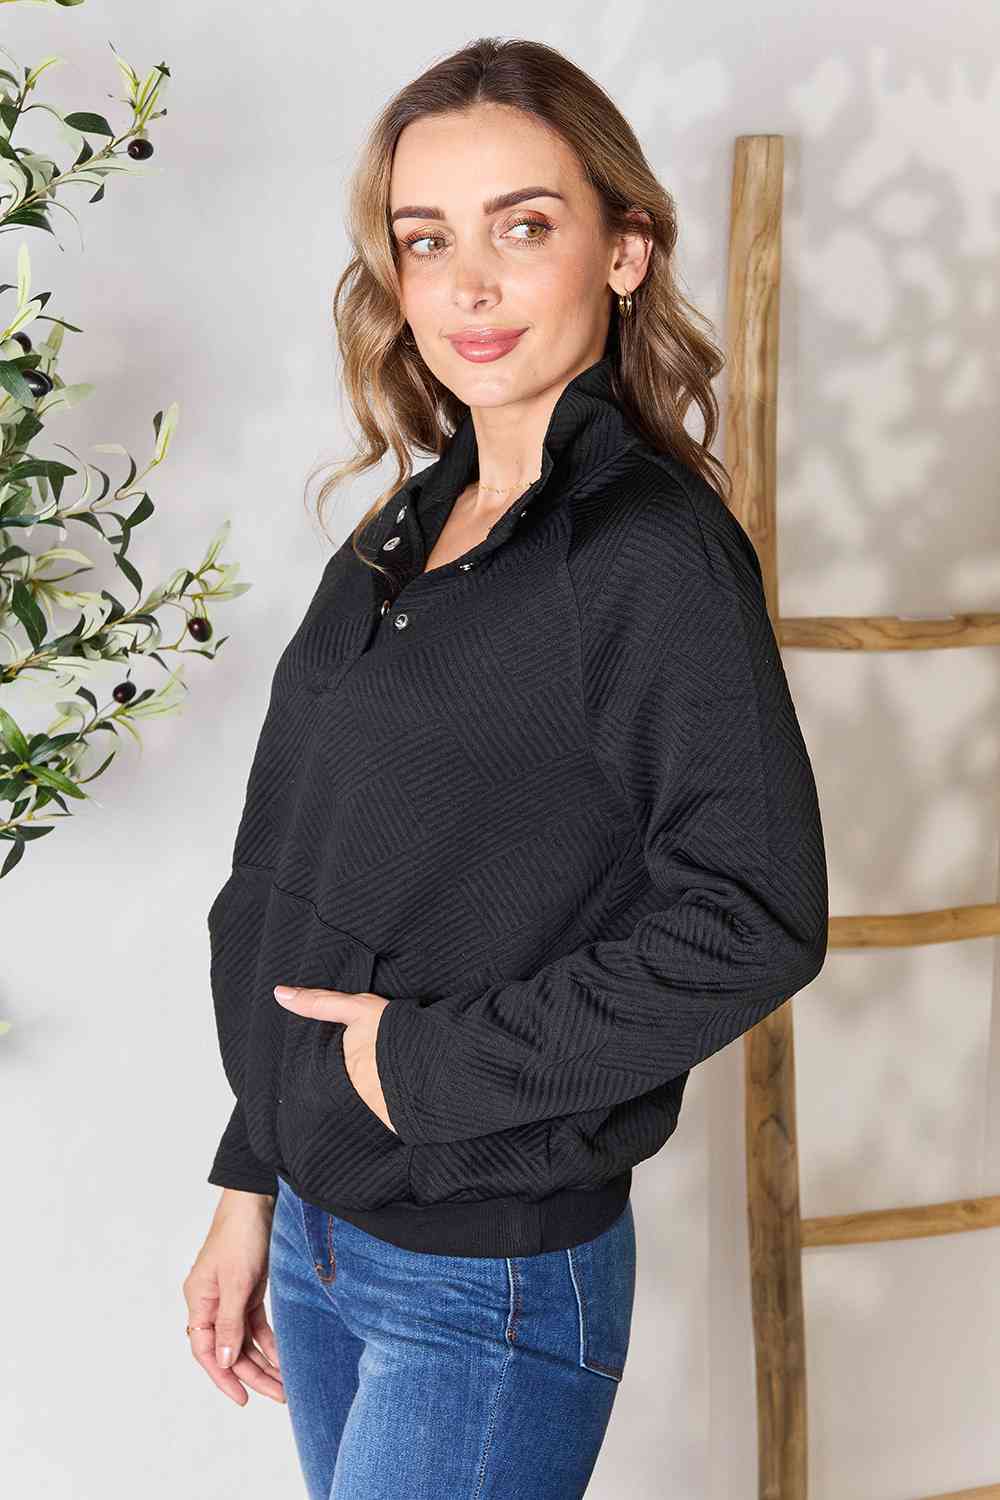 Double Take Half Buttoned Collared Neck Sweatshirt with Pocket - Everyday-Sales.com